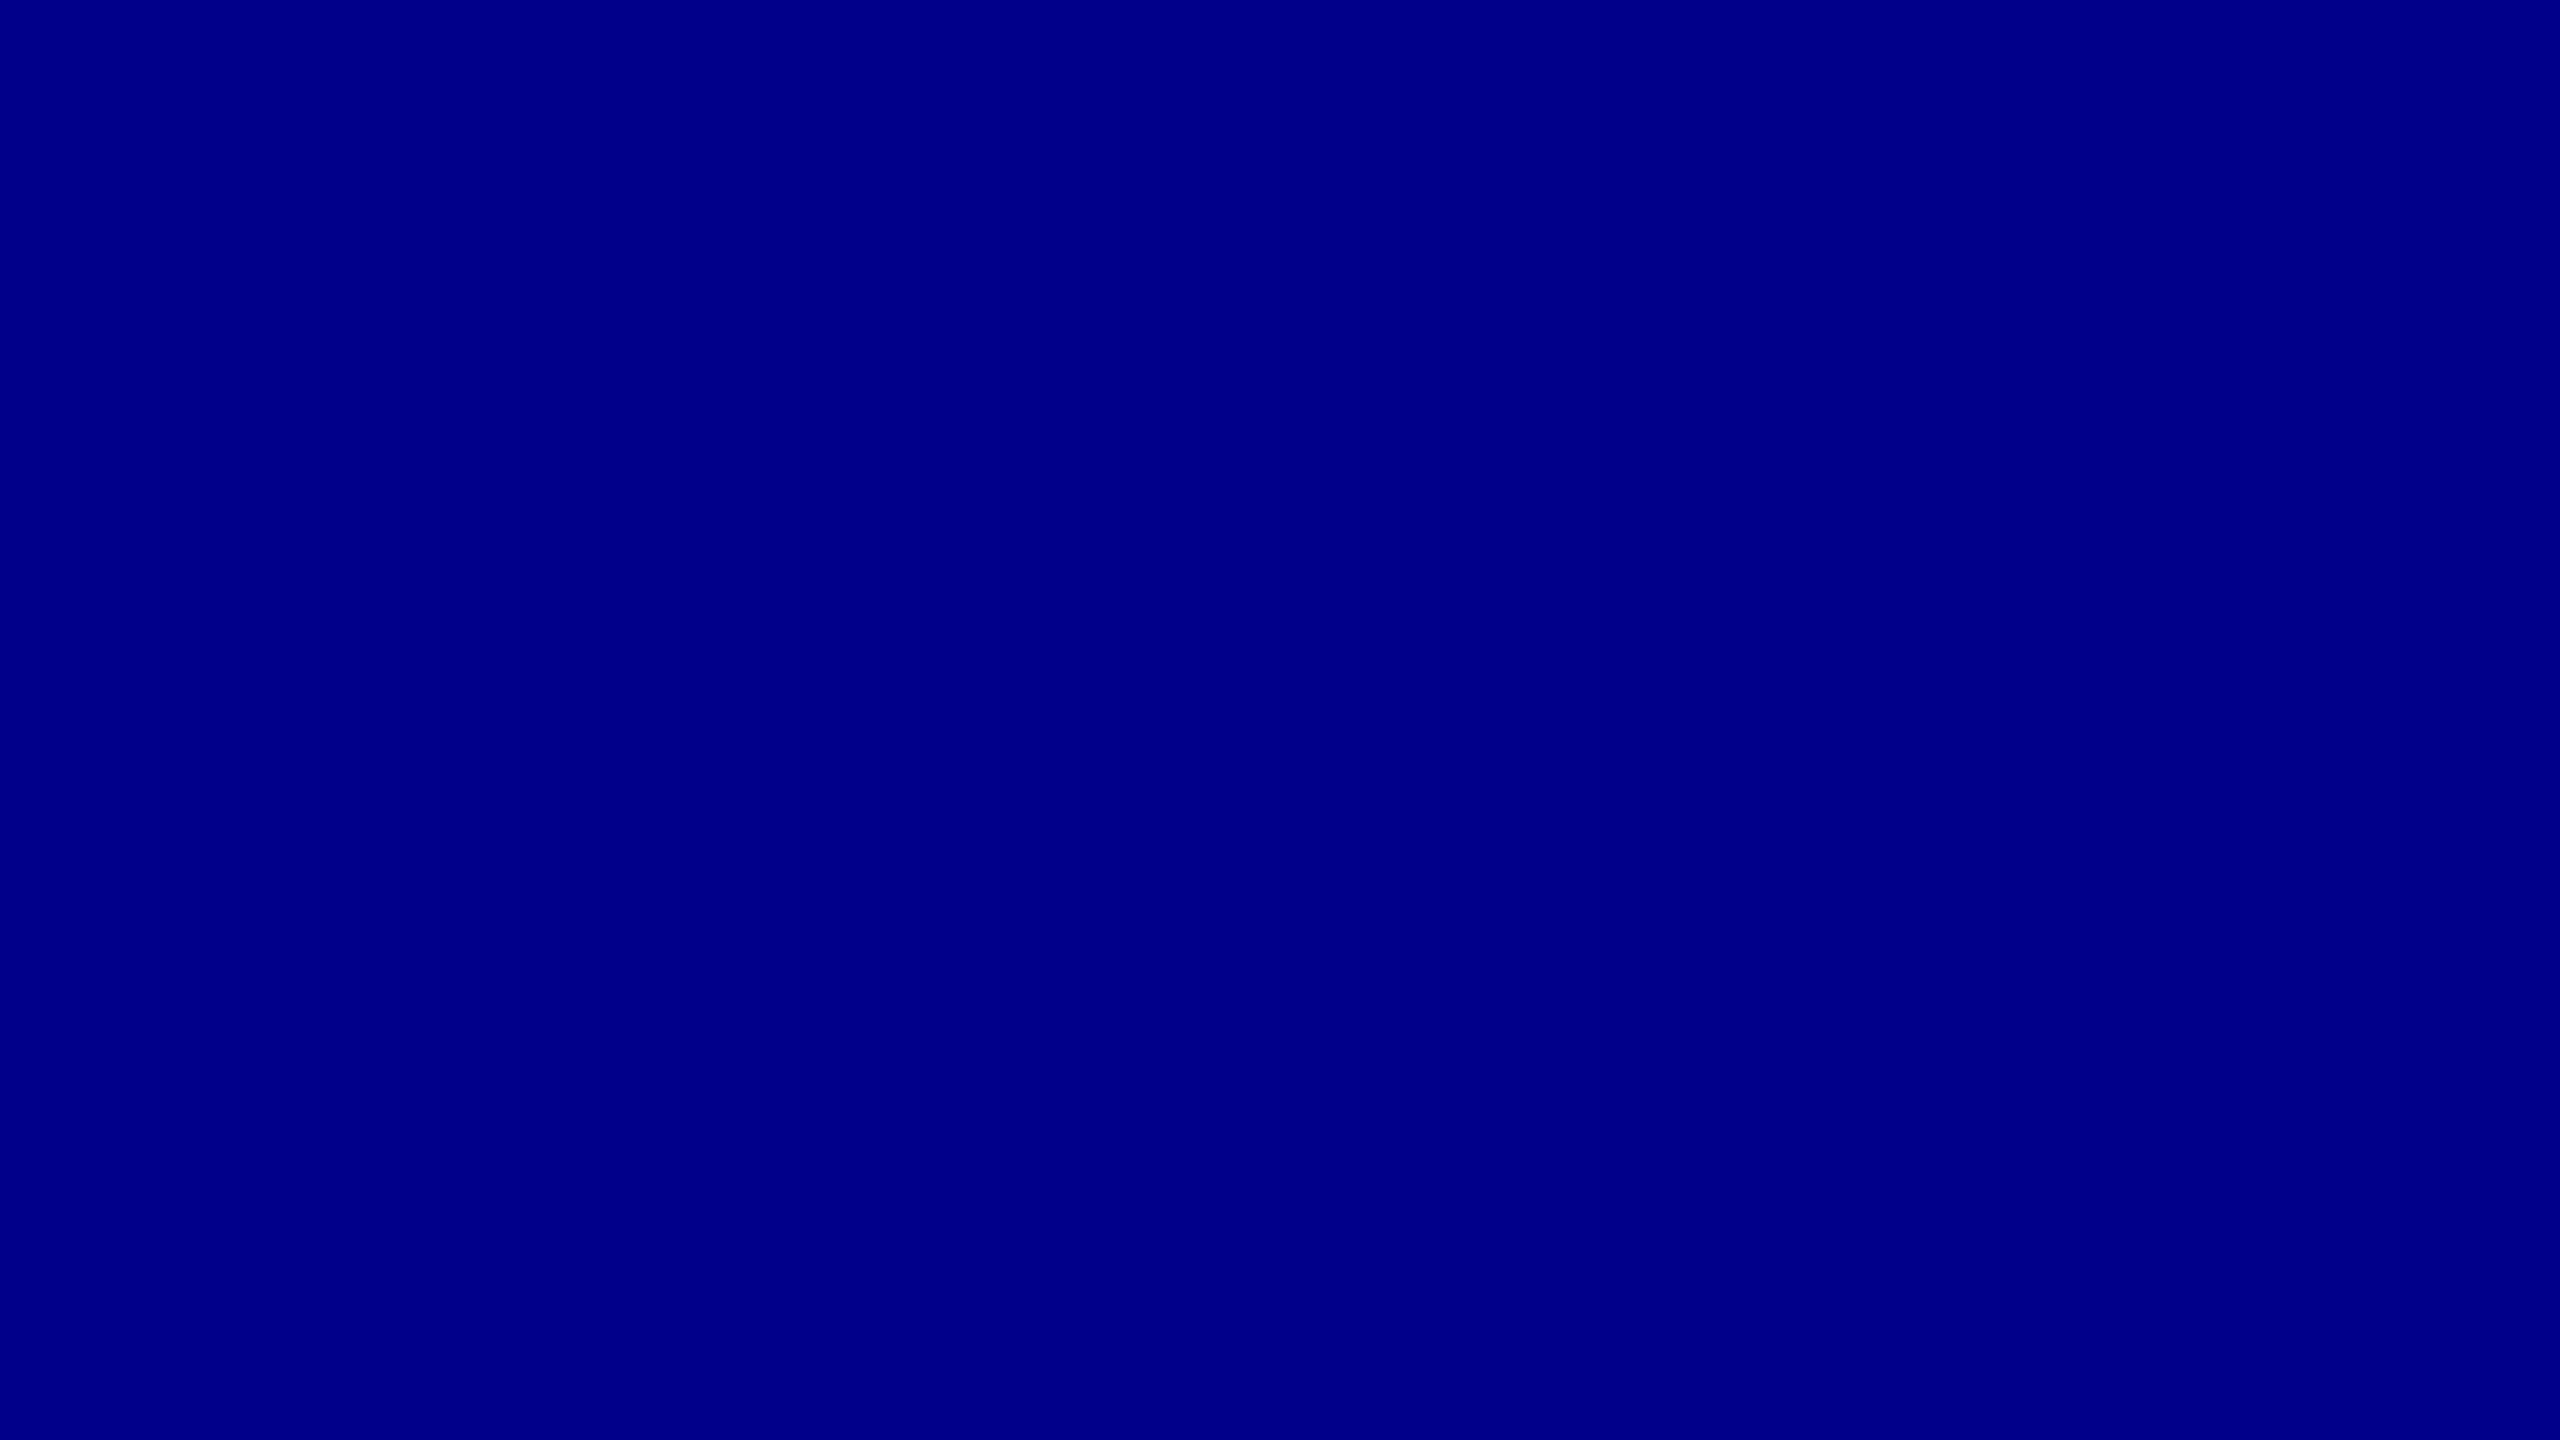 2560x1440 Dark Solid Blue Background Hd Wallpapers Pictures